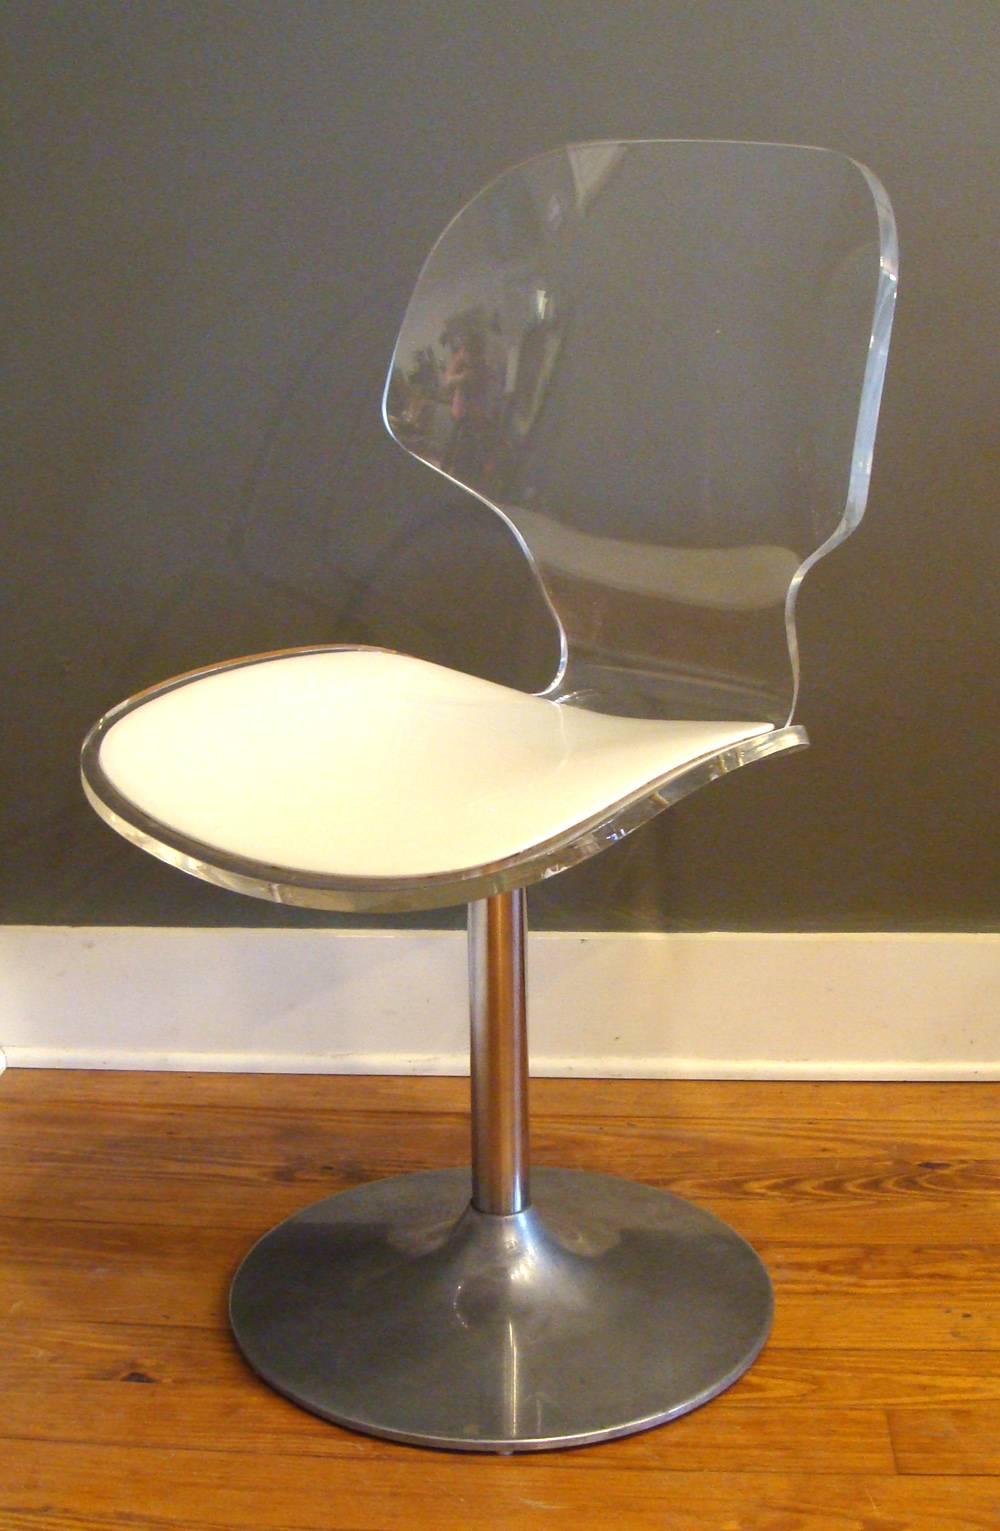 Matching pair of Lucite swivel chairs on pedestal base accompanied by matching table, all from Hill Mfg. Co. Chairs retain original white vinyl in good condition. Swivel works smoothly. Lucite is in beautiful condition.
Chairs are dining/desk